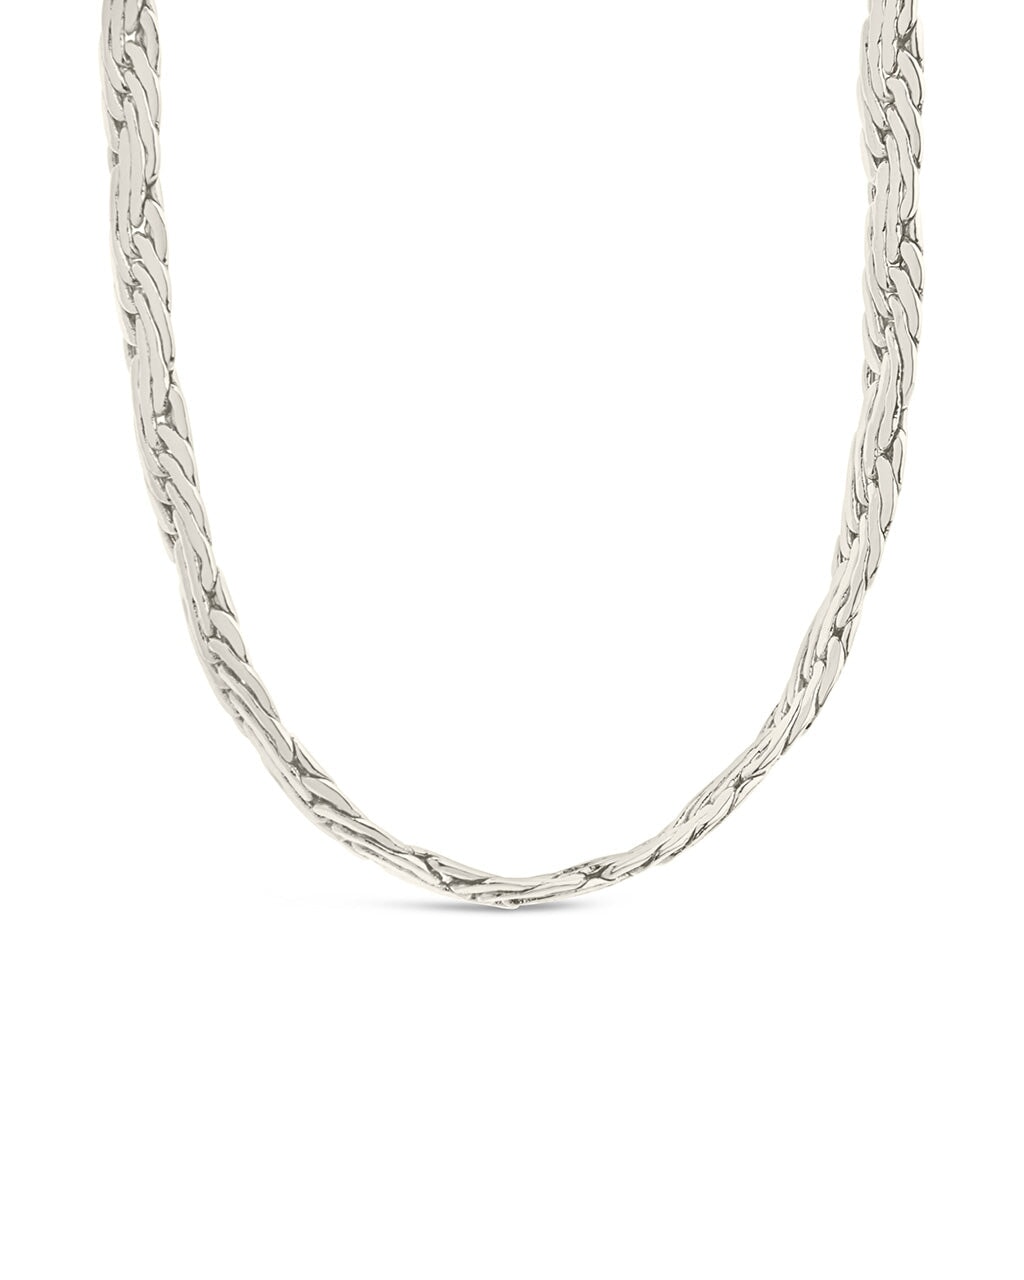 Brandy Chain Necklace Necklace Sterling Forever Silver 